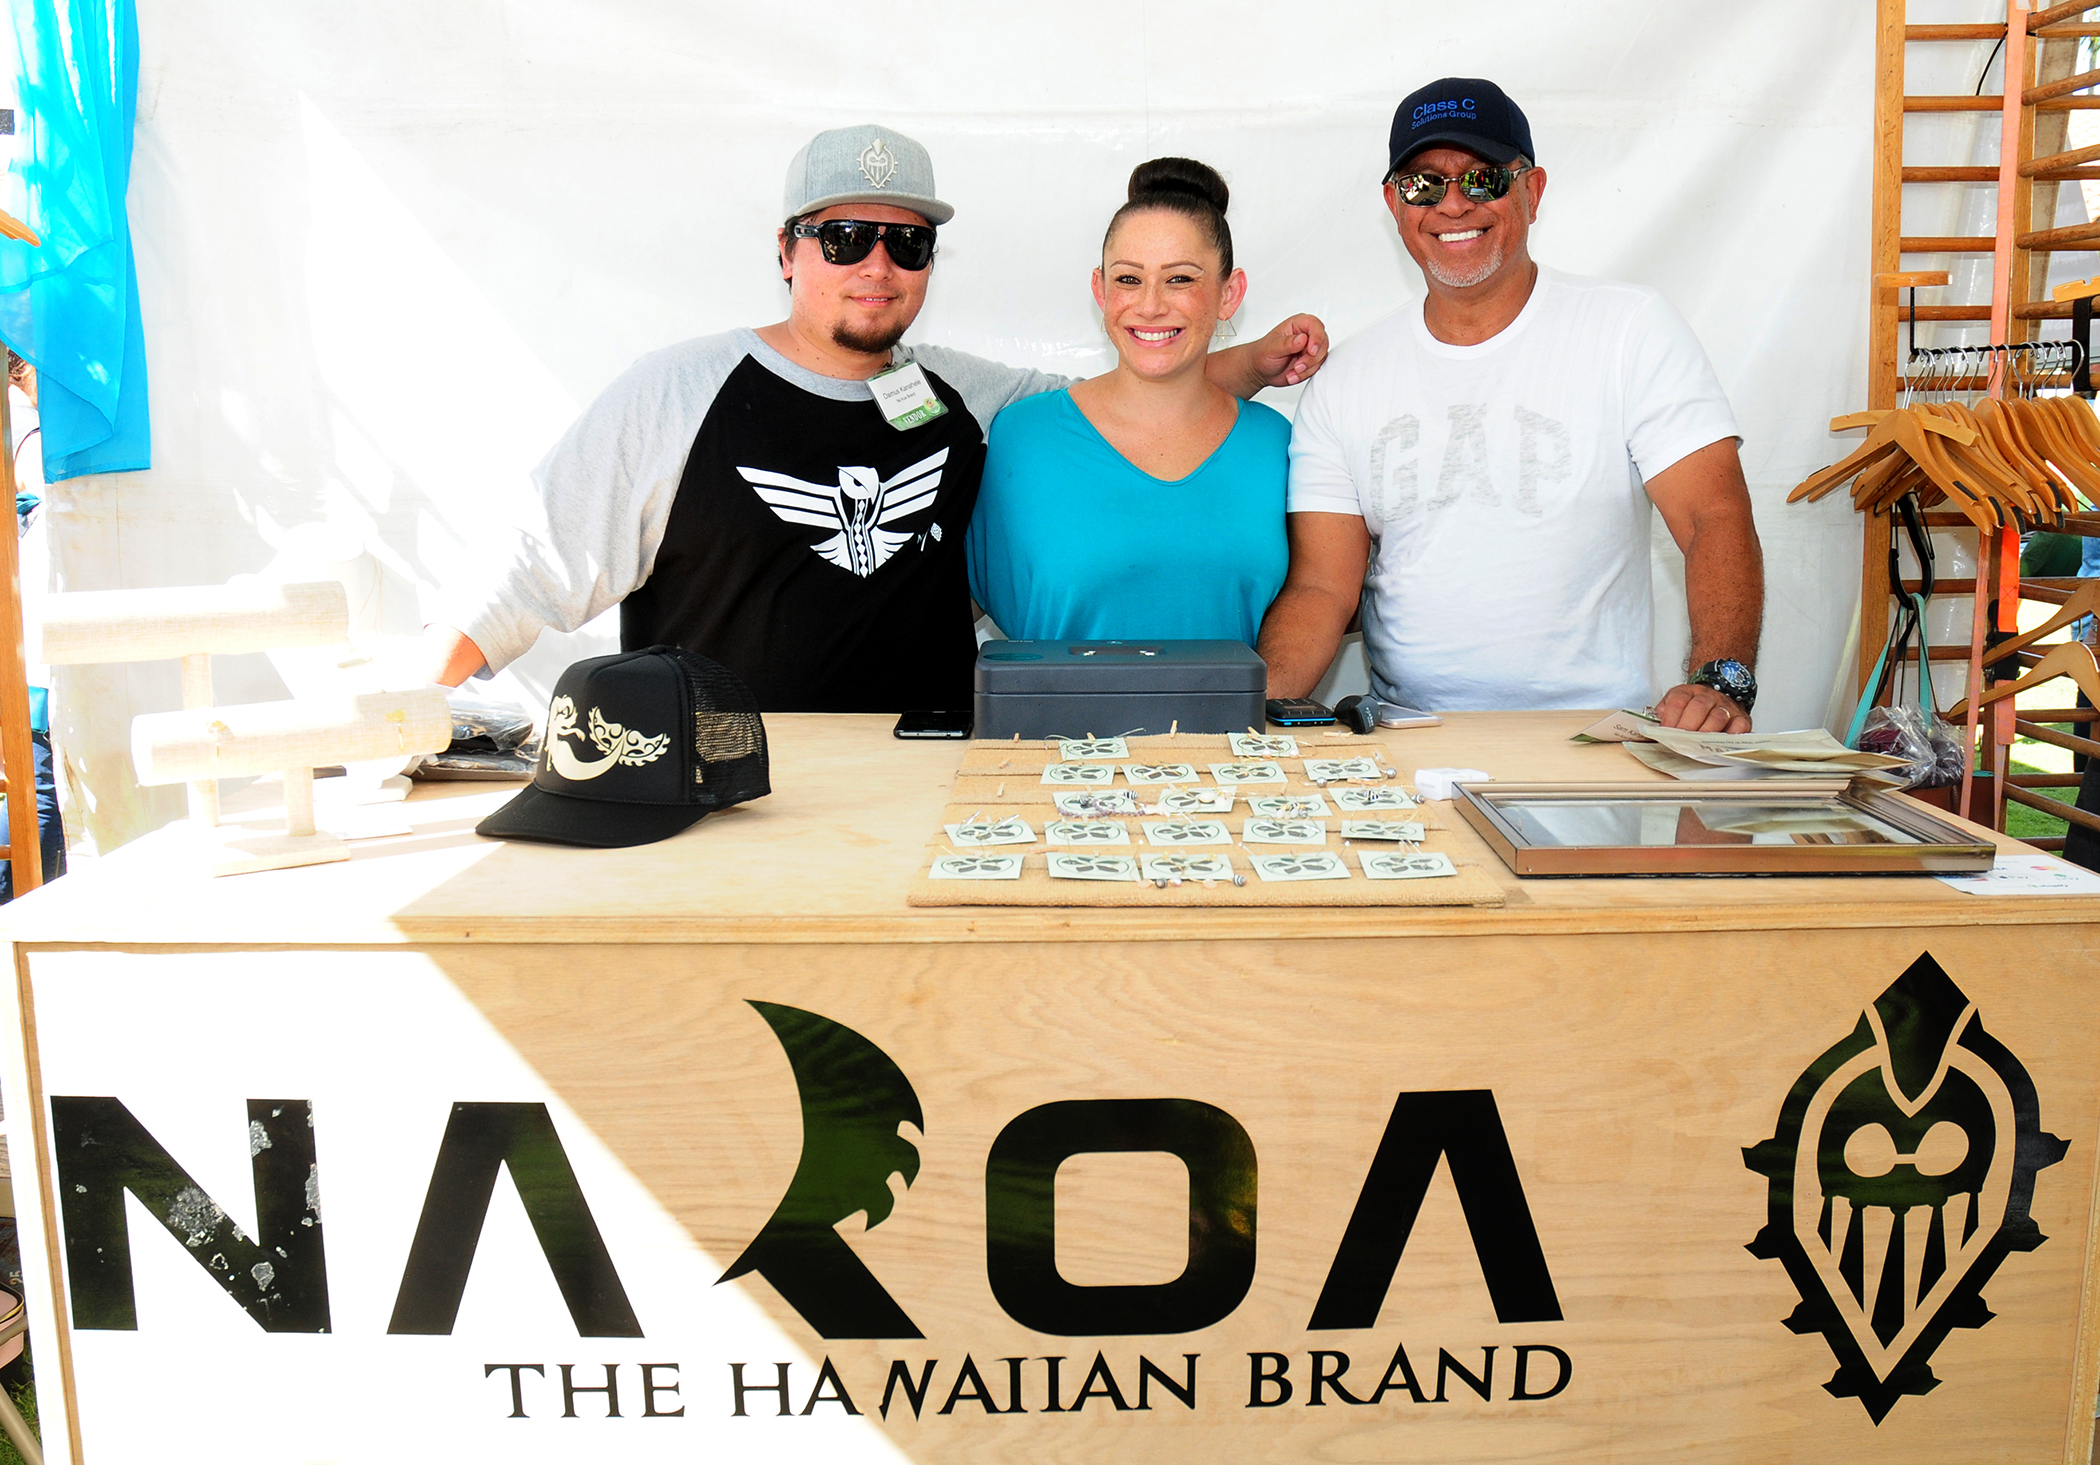 According to Shanna Kanahele of Na Koa Brand, “This festival really catapulted our business. We now have two stores in Queen Kaahumanu Center and an online business."